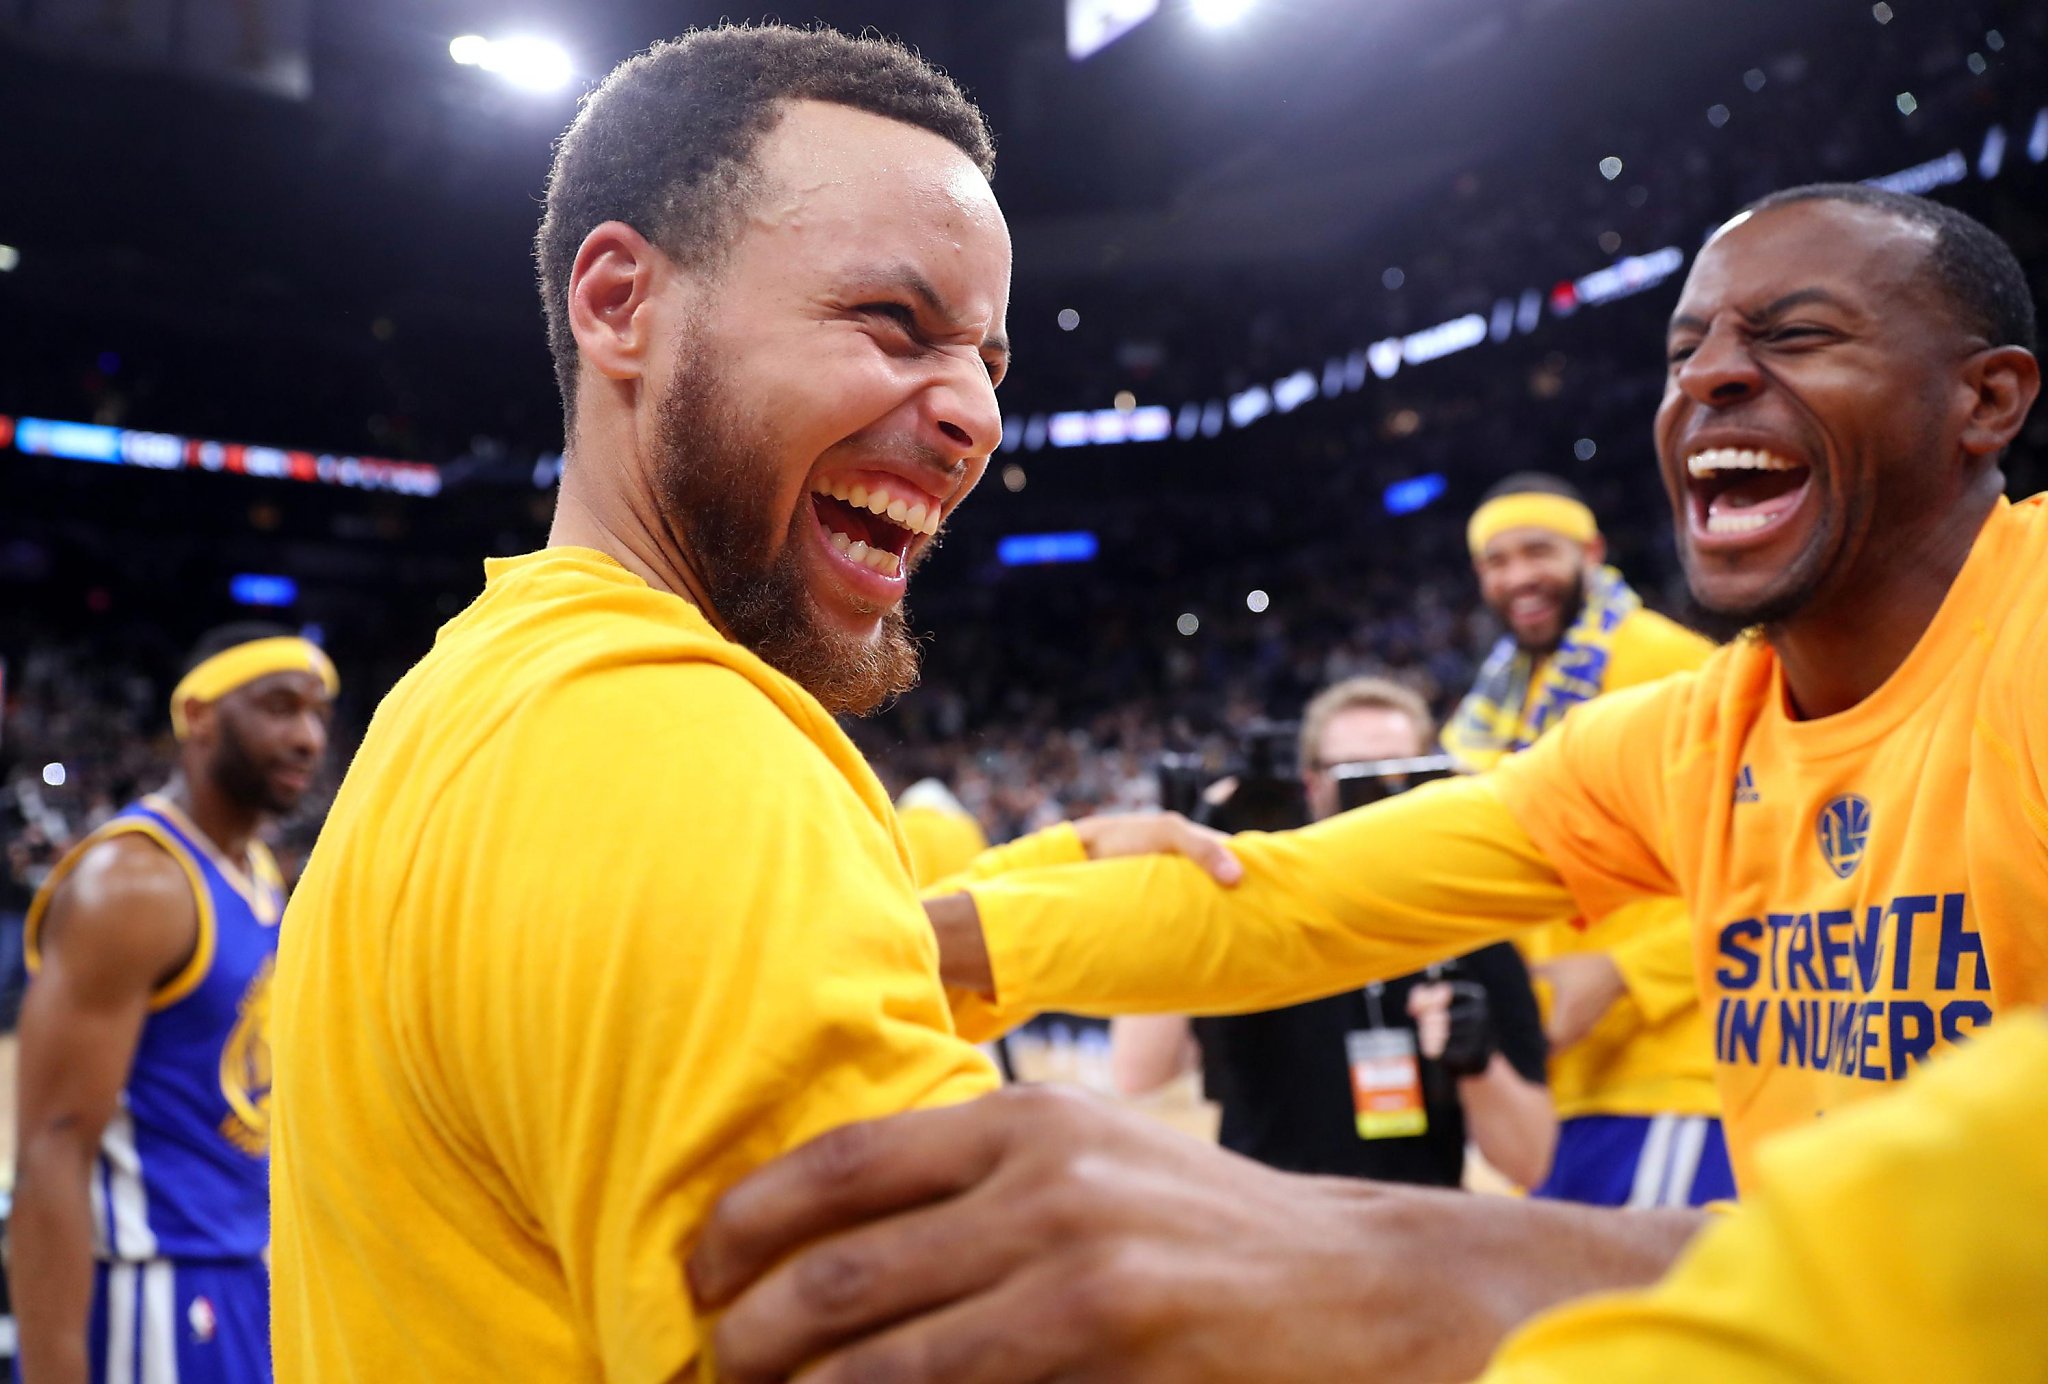 Stephen Curry: A Big Dog with a selfless personality